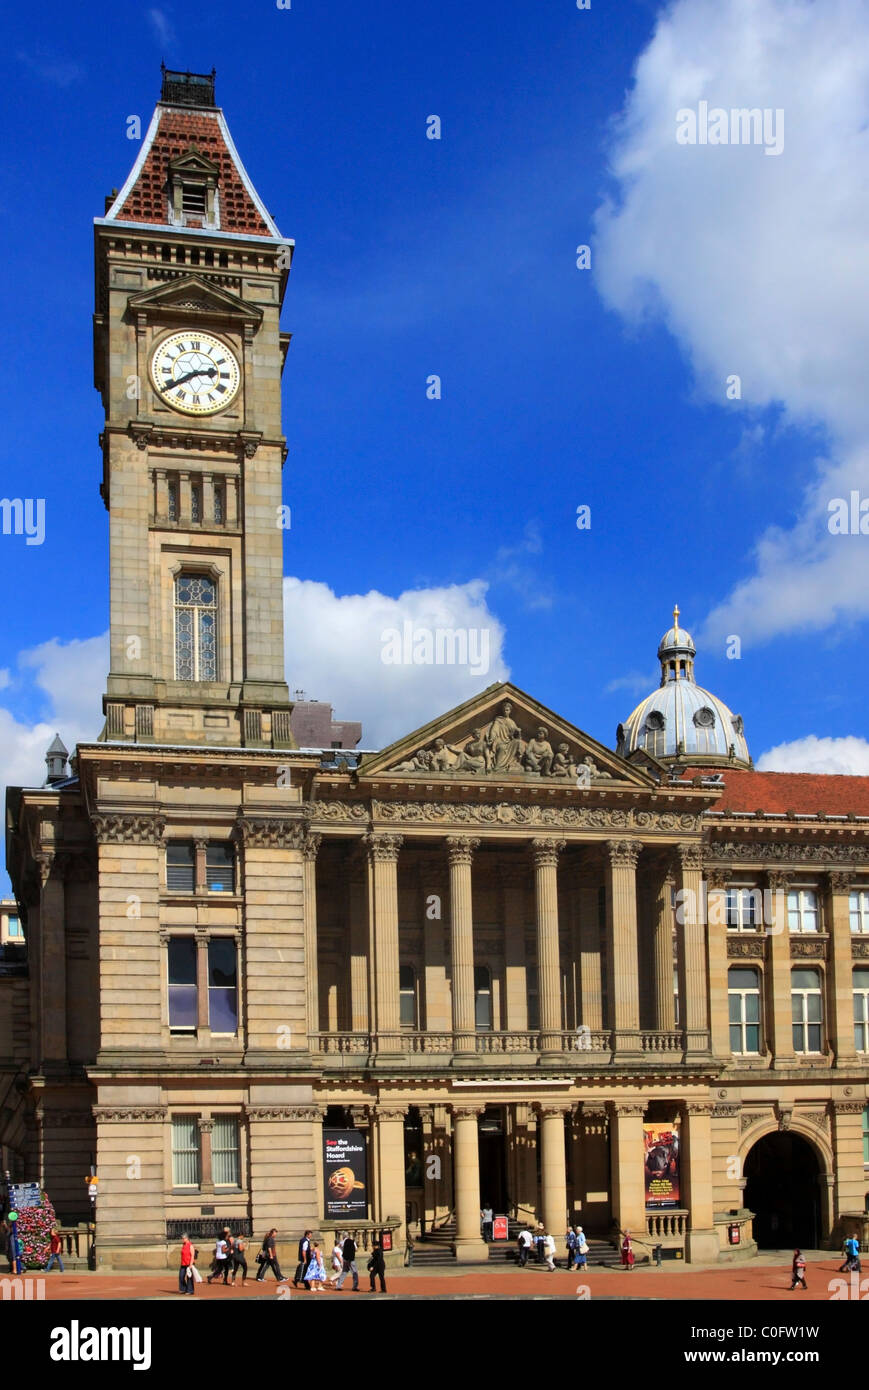 The Museum and Art Gallery, Chamberlain Square, Birmingham, West Midlands, England, Europe Stock Photo